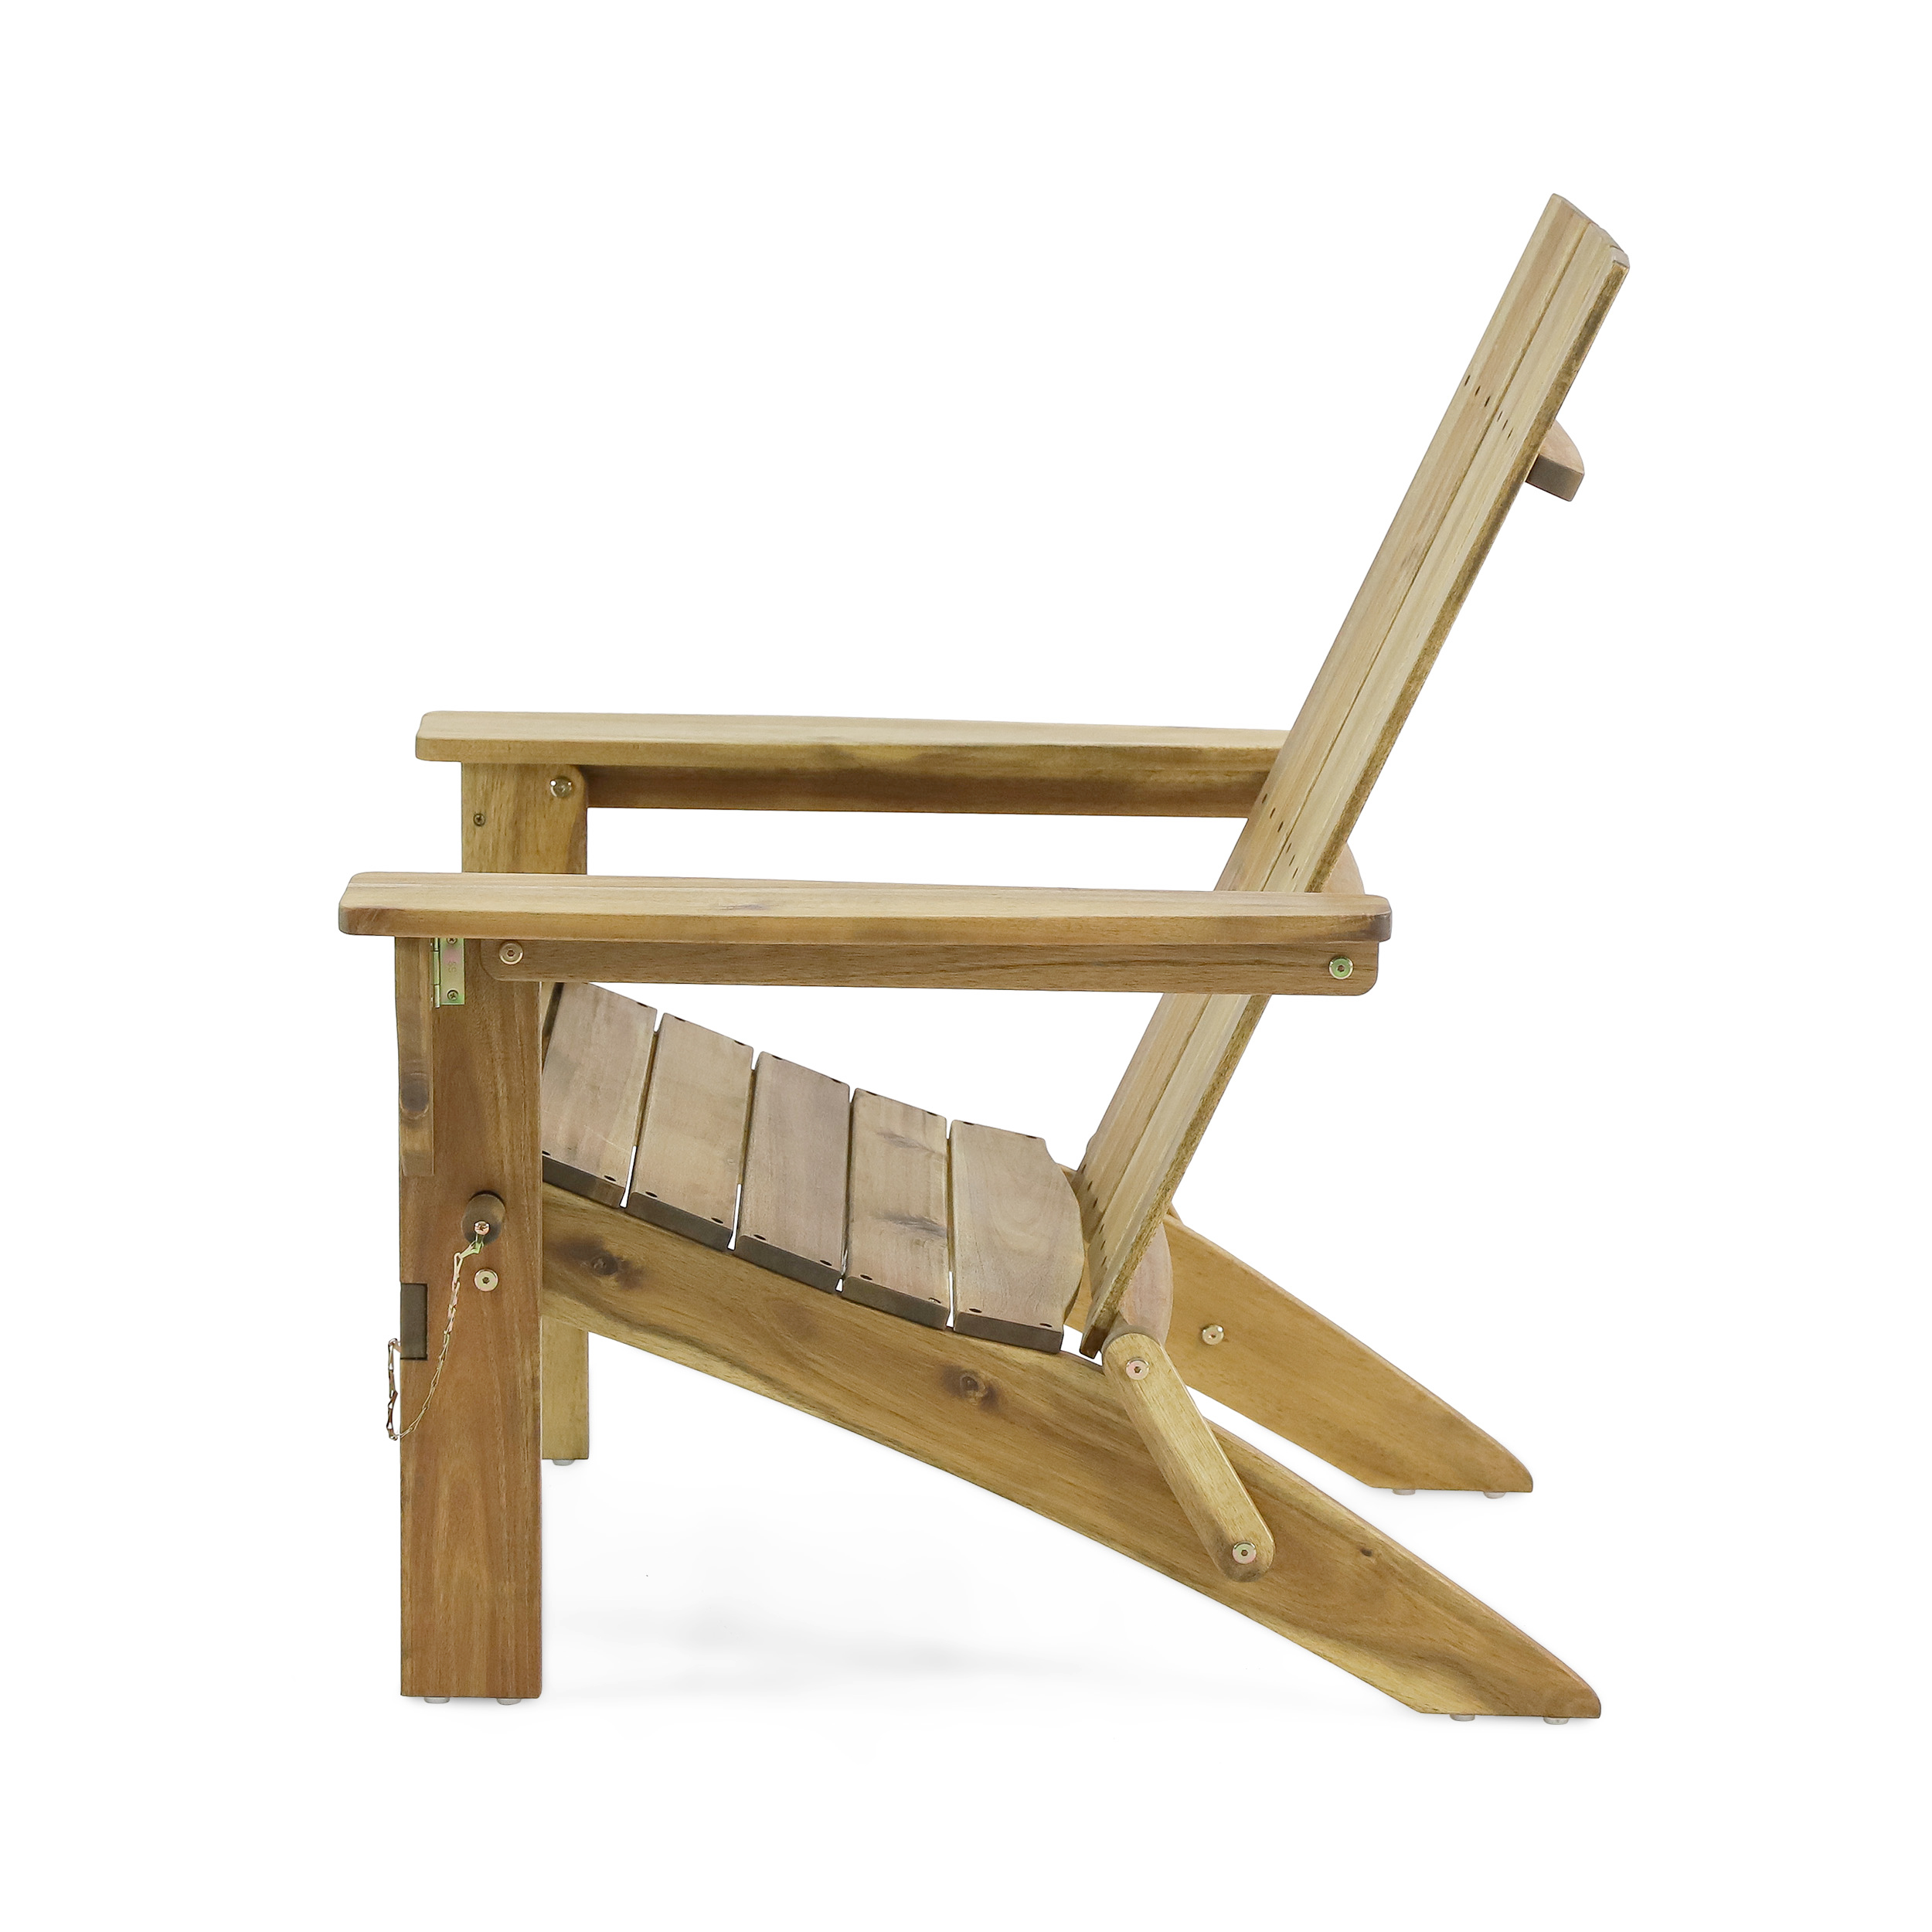 Outdoor Classic Natural Color Solid Wood Adirondack Chair Garden Lounge Chair - image 4 of 5